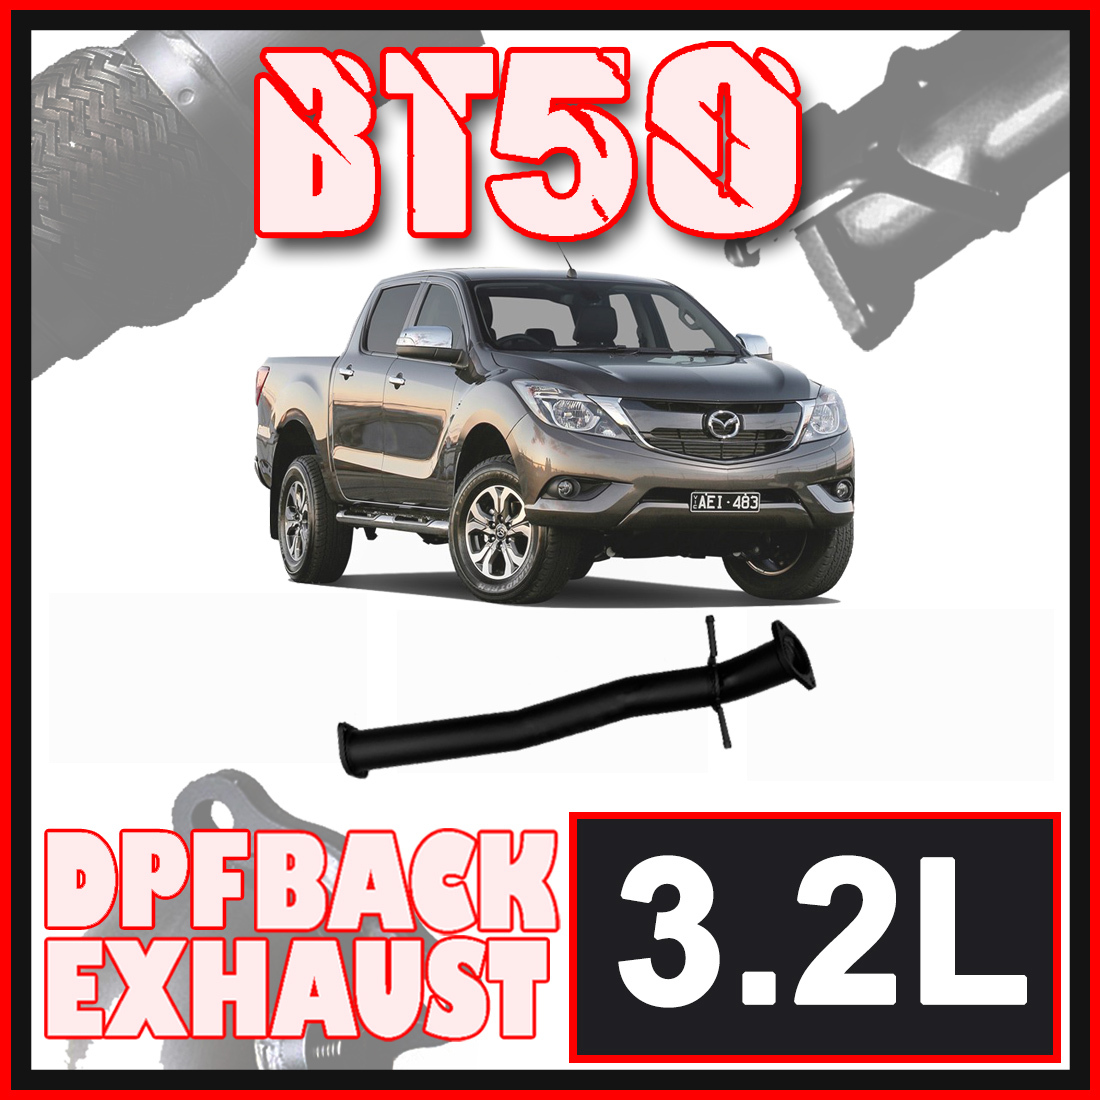 Mazda BT50 Exhaust 3.2L 3" DPF Back Systems image